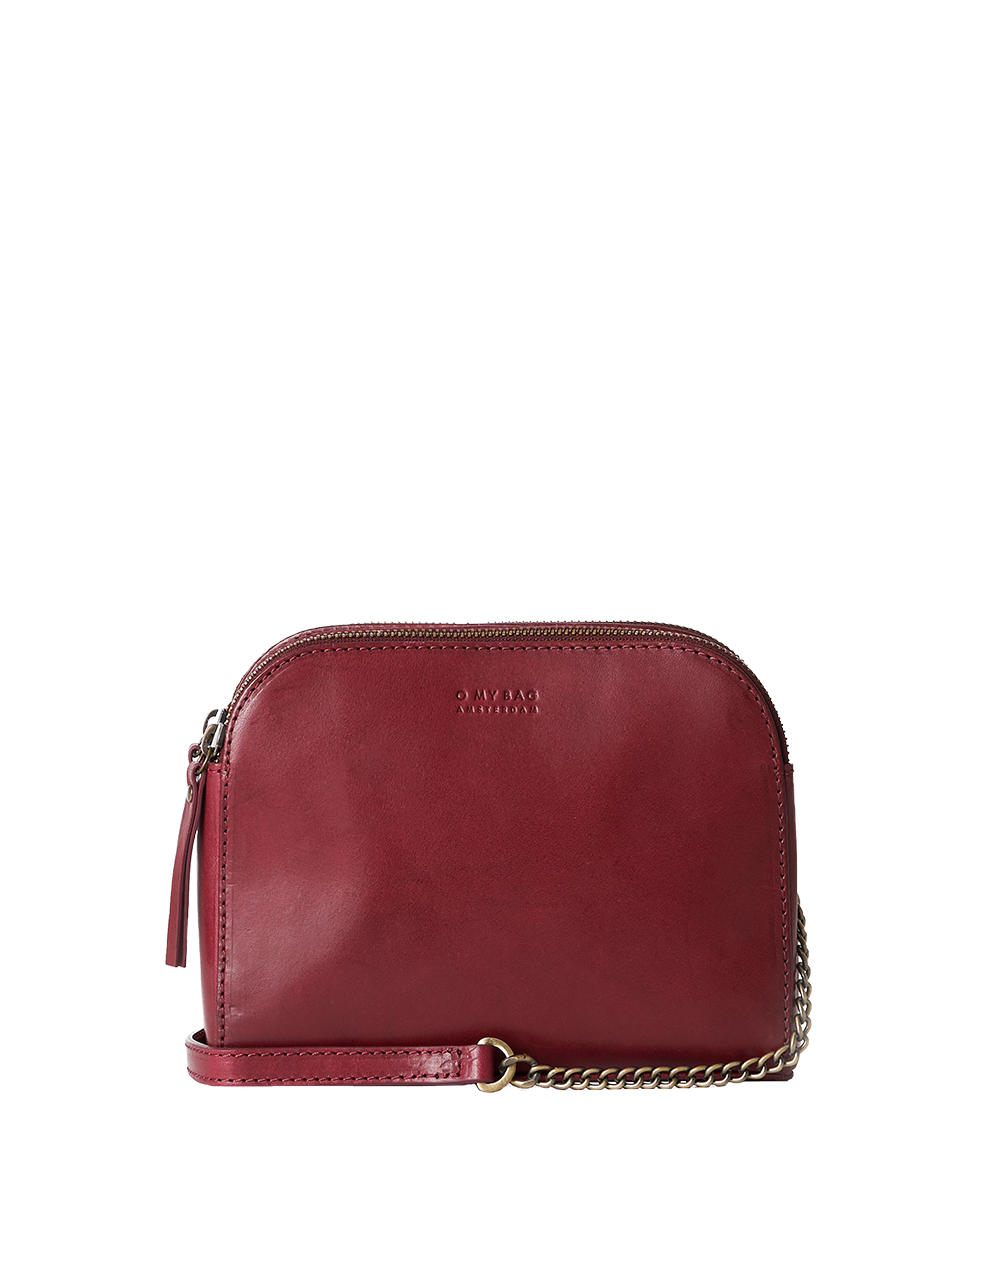 Ruby Leather womens handbag. Square shape with an adjustable leather & chain strap. Front product image. Womens handbag. Square shape with an adjustable leather & chain strap. Close up shot